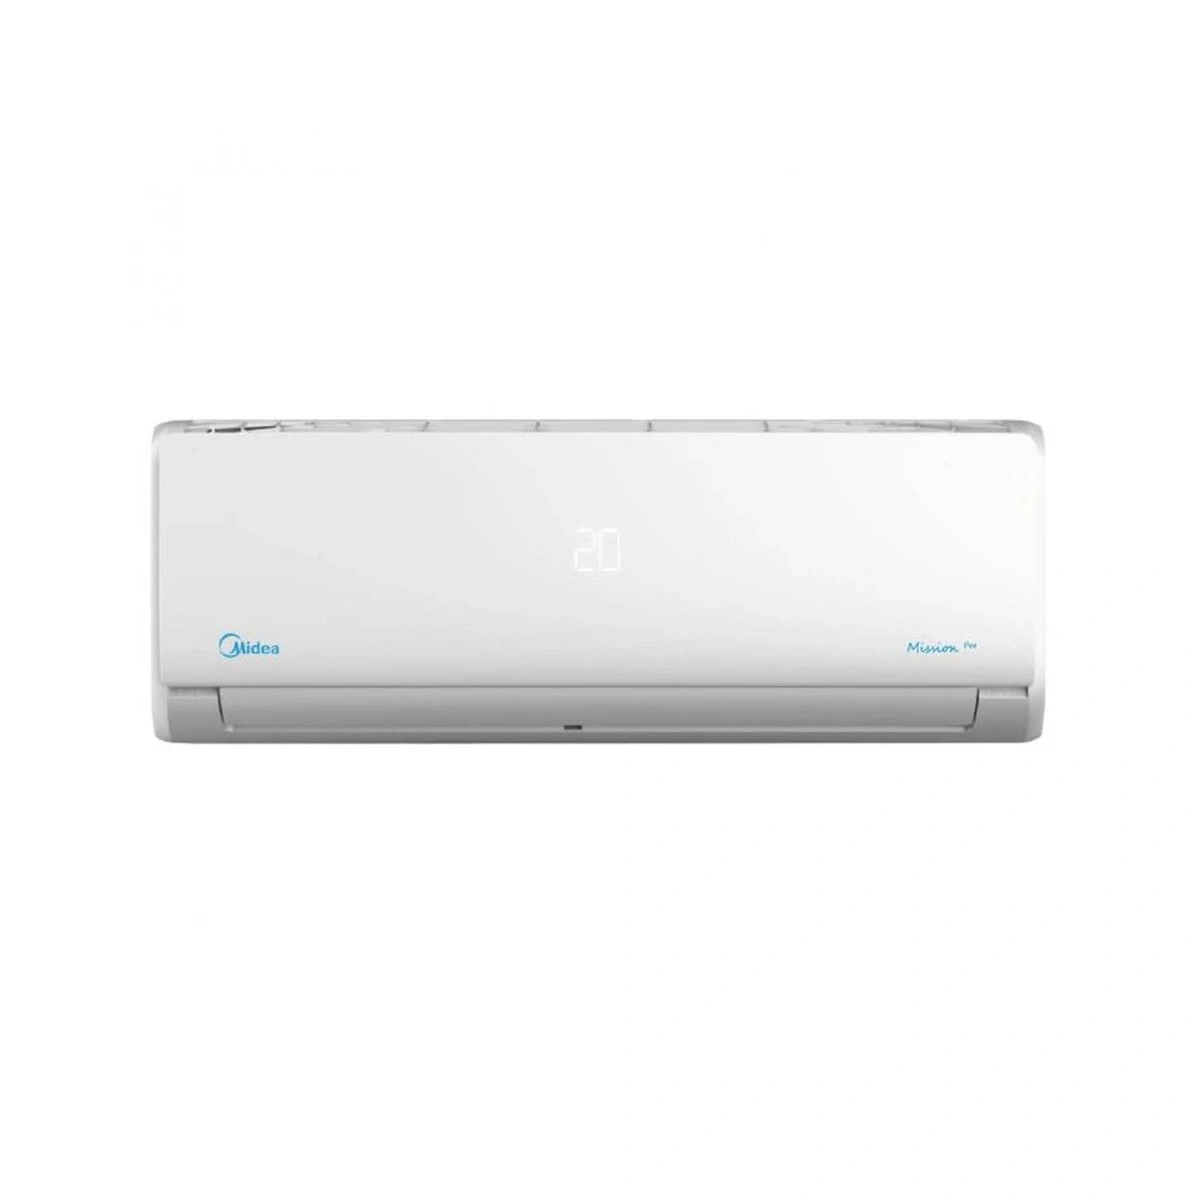 Midea  Mission Pro Cooling & Heating Split Air Conditioner, 3HP